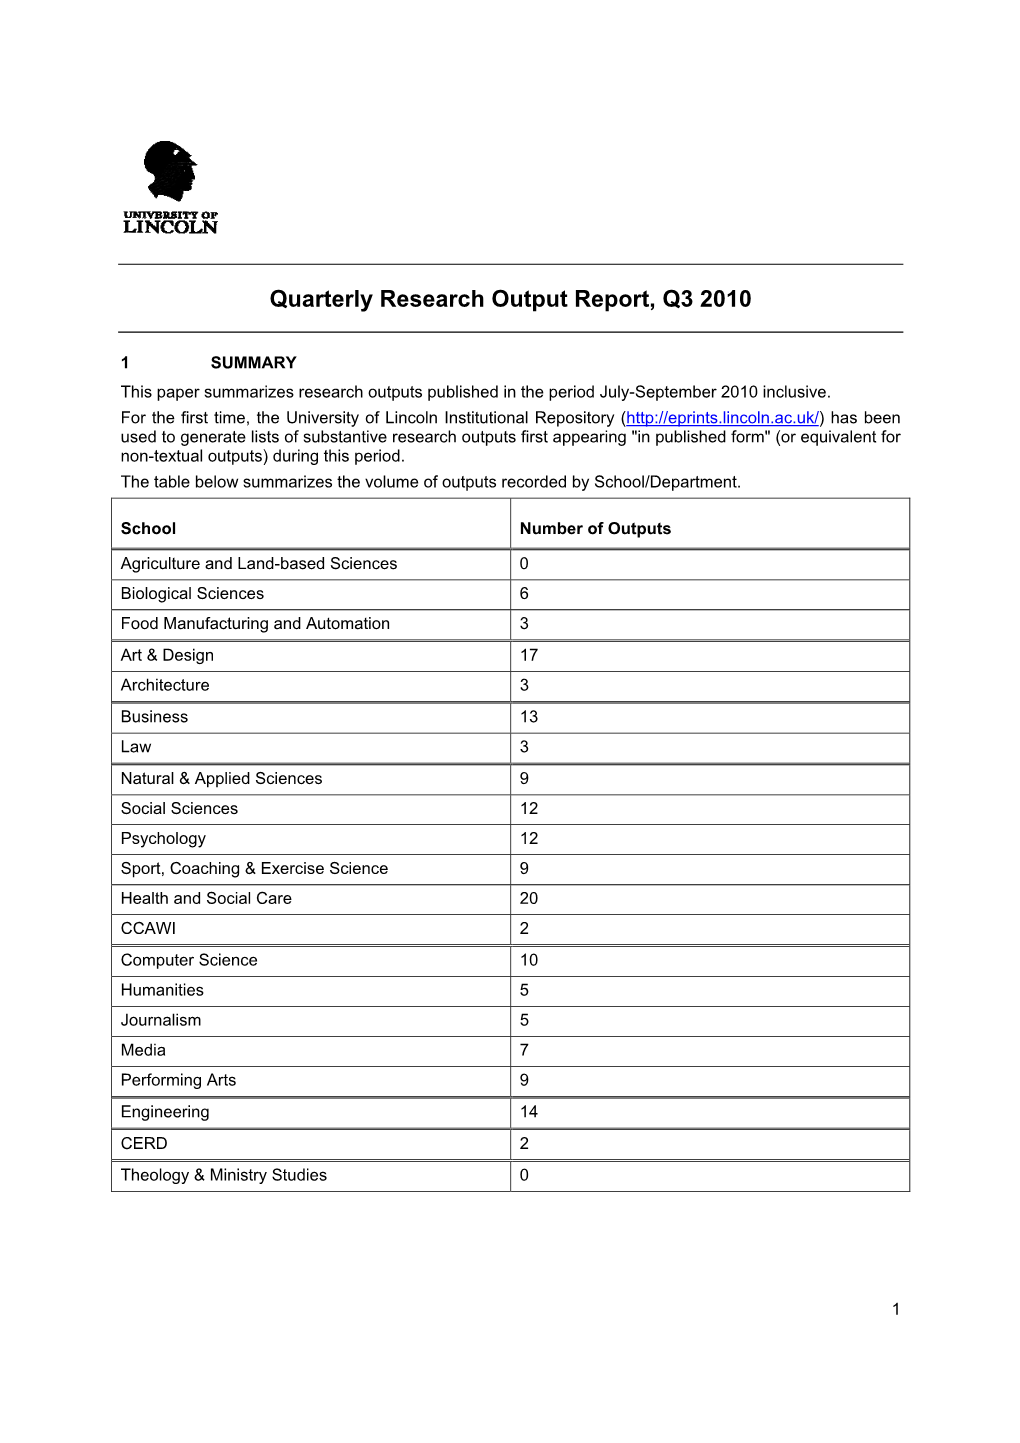 Quarterly Research Output Report, Q3 2010